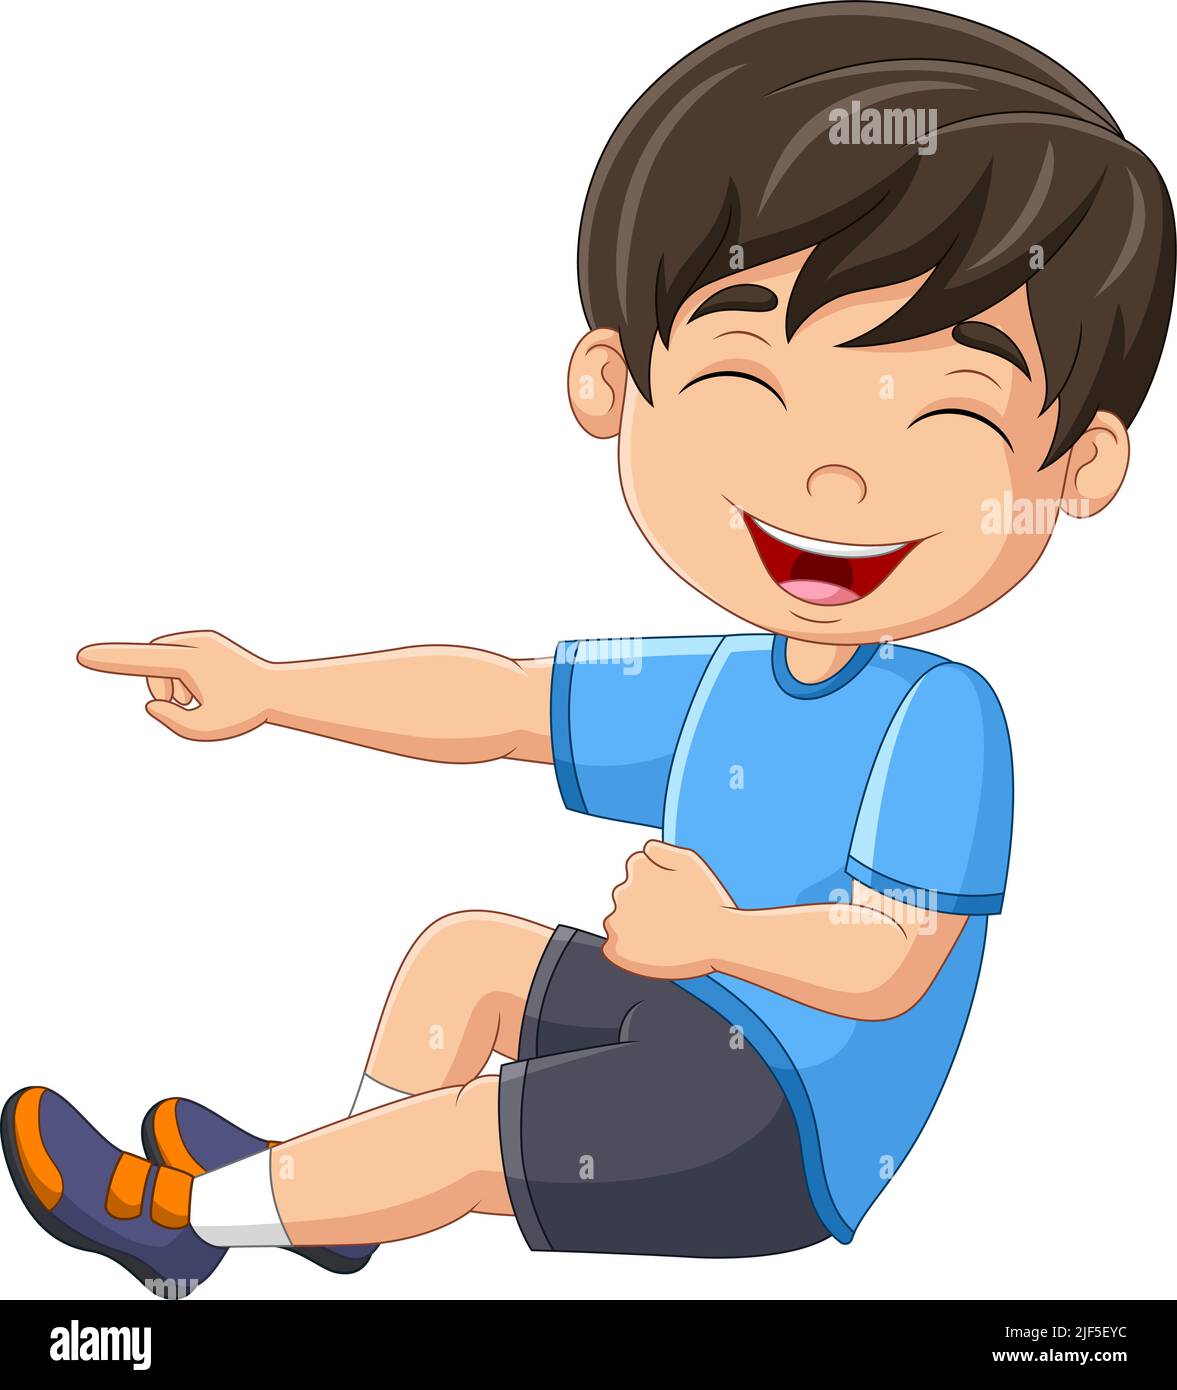 Cartoon boy laughing out loudly and pointing Stock Vector